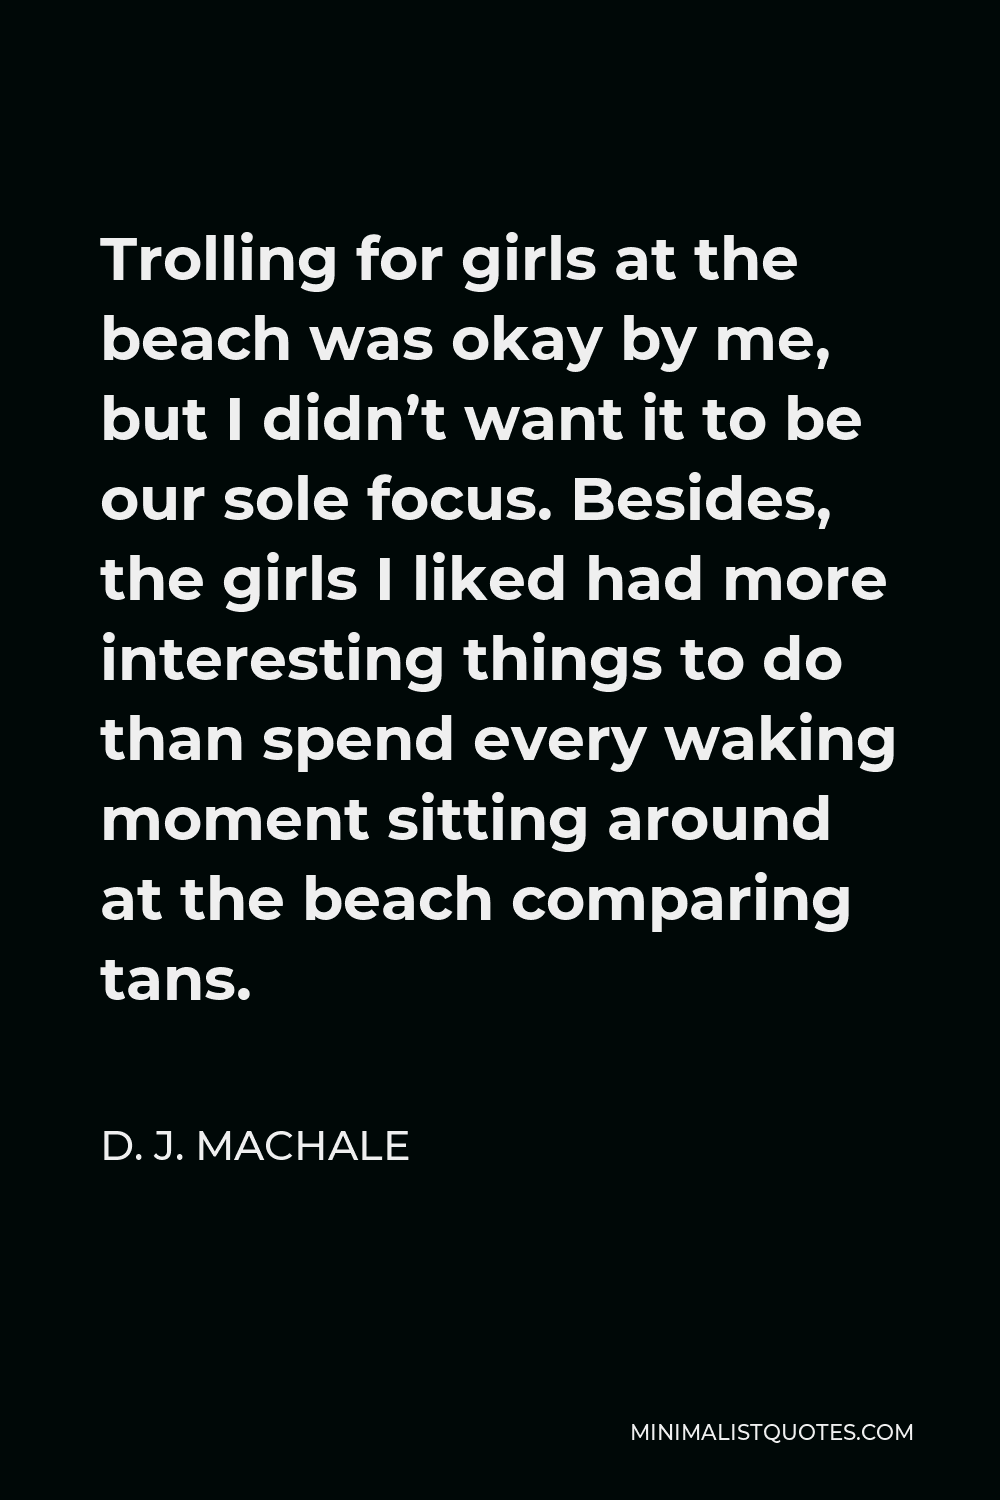 D. J. MacHale Quote - Trolling for girls at the beach was okay by me, but I didn’t want it to be our sole focus. Besides, the girls I liked had more interesting things to do than spend every waking moment sitting around at the beach comparing tans.